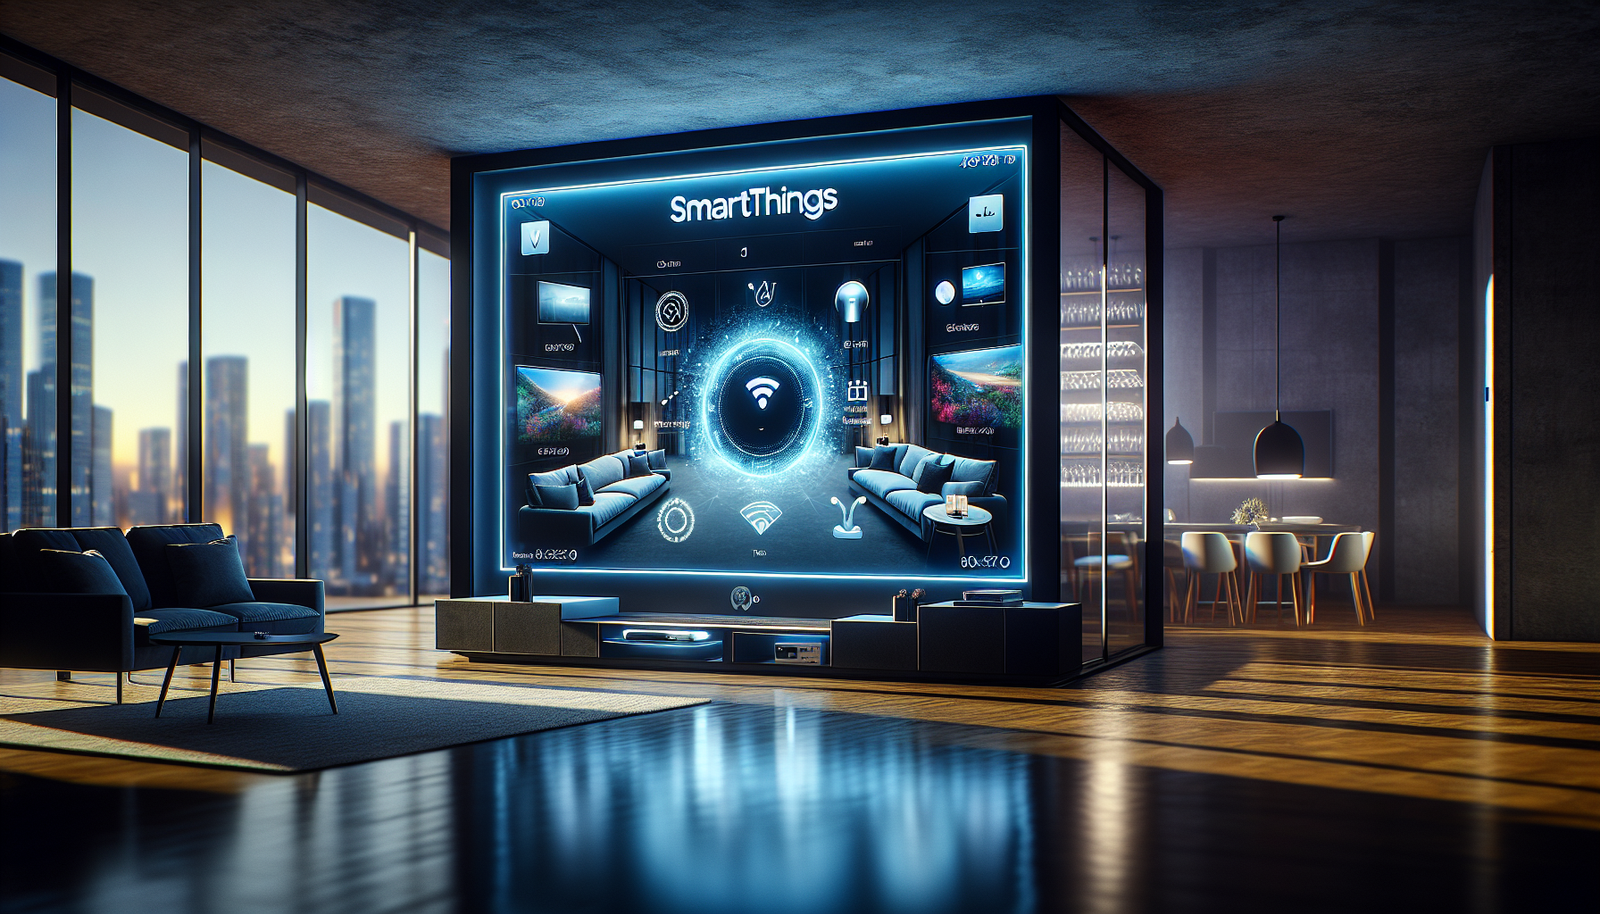 Samsung collaborates with Tesla to integrate SmartThings and Tesla products